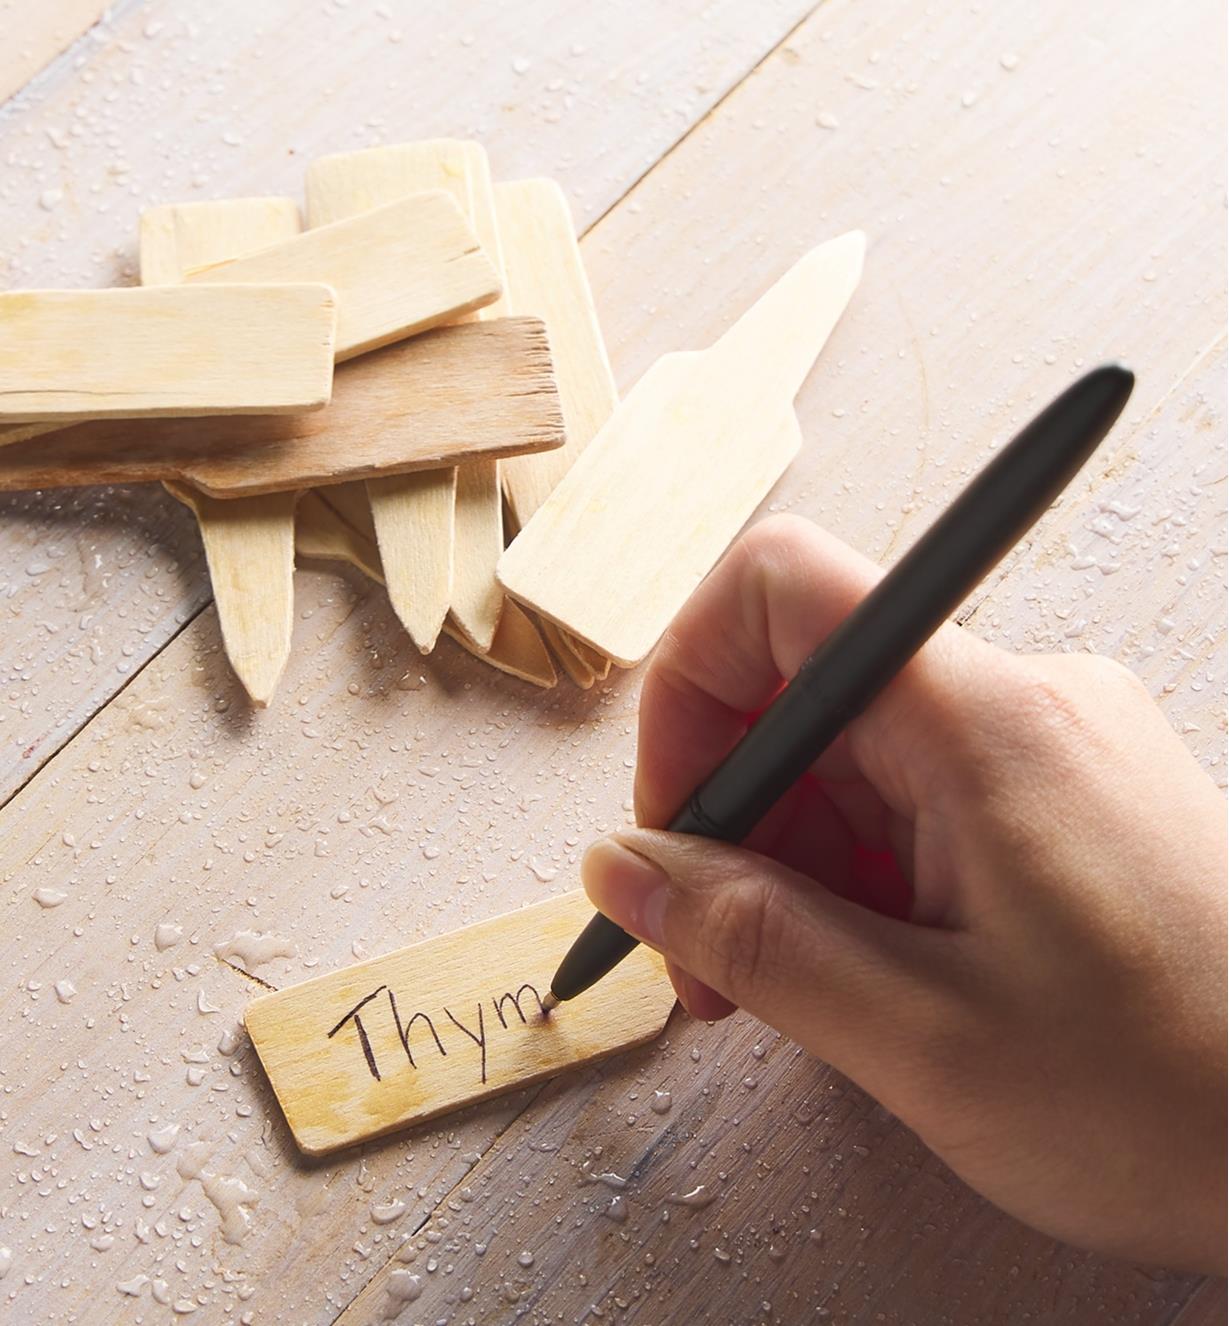 Using a “Bullet” Space Pen to write on wood